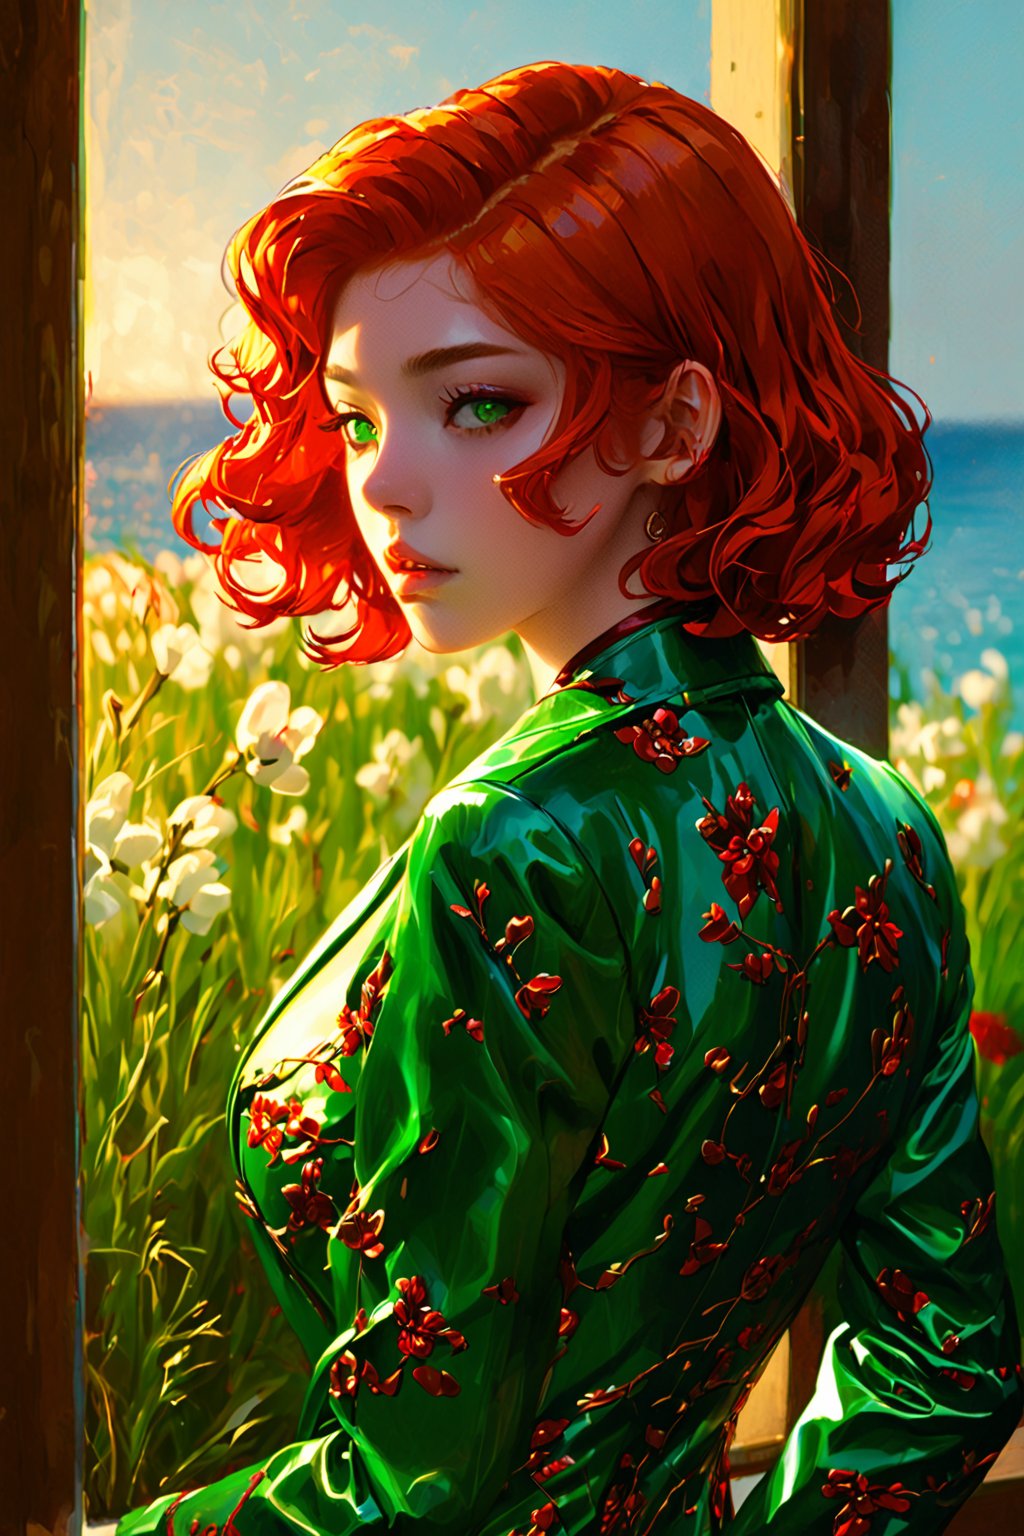 Beautiful sensual woman with perfect body looking through the window, window opened to the sea vision, surrealistic scene, (glowing green eyes : 1.8), (short wavy natural-red hair : 2), (beautiful make-up : 2), (detailed latex clothes : 1.6), (gucci patterned suit : 1.8), (BBW body : 2.4), (masterpiece), (yoongonji art : 1.8), (beautiful new world art : 1.8), (sam does art : 1.8), (Ilya kuvshinov art : 1.8), lo-fi atmosphere art, (vivid colors, high-contrast, bloom lighting), (depht of field : 2), beautiful blossom scene, sunrays lighting, 